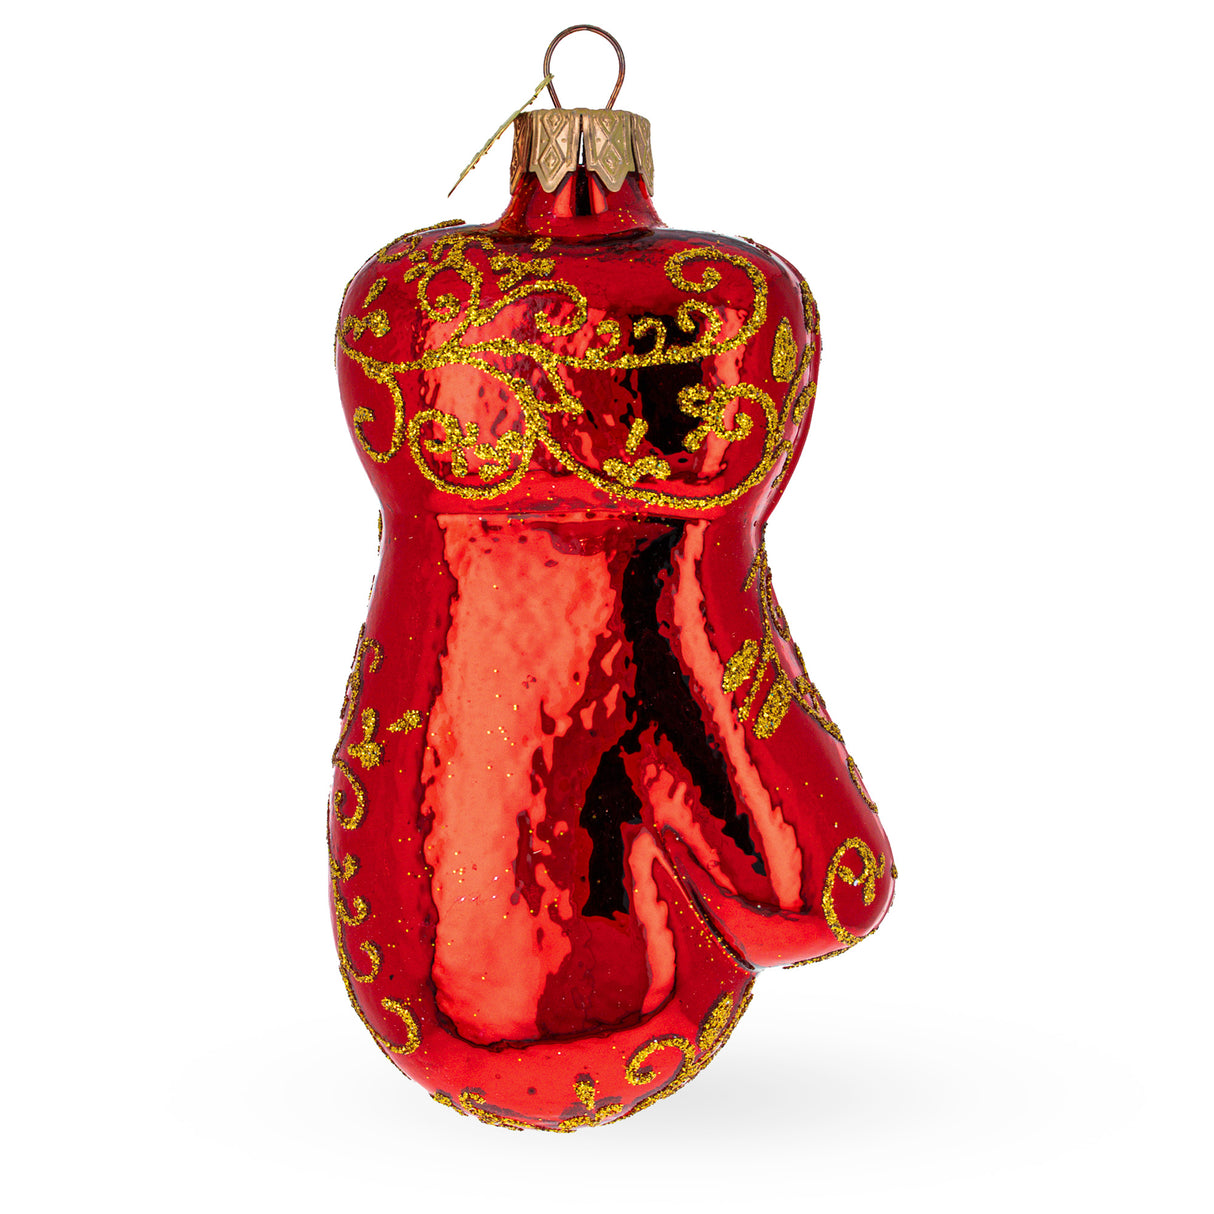 Glass Glossy Red Mitten Glass Christmas Ornament in Red color